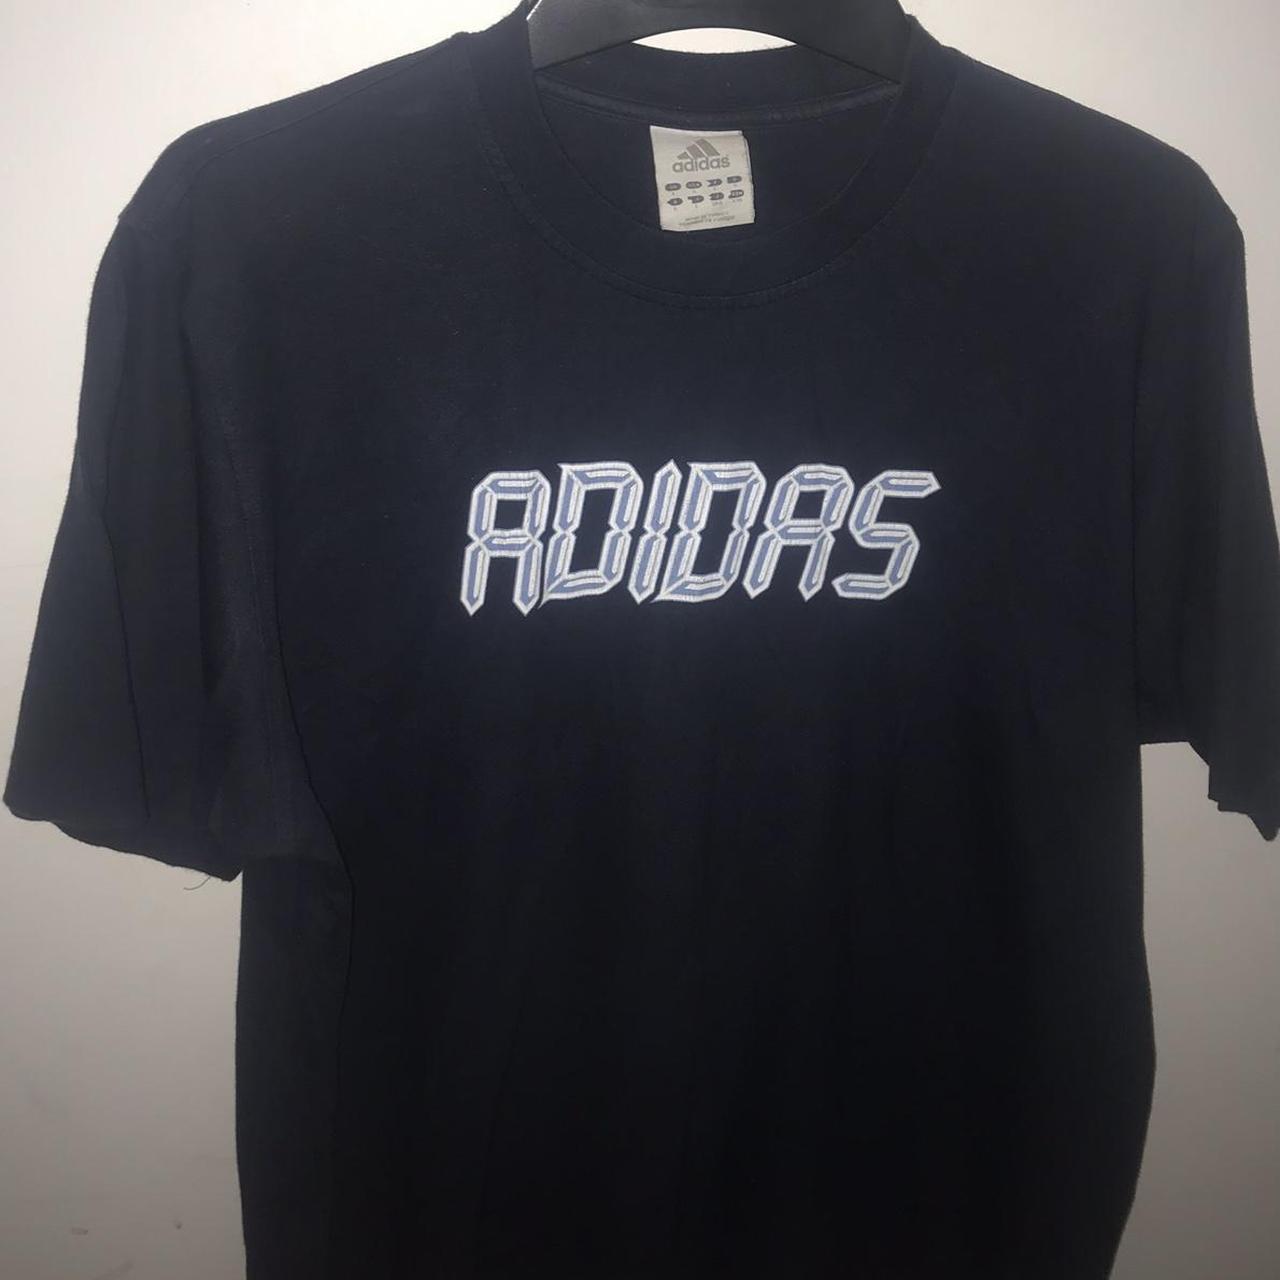 Rare Deadstock Early 2000s Y2K Adidas T-shirt Size:... - Depop